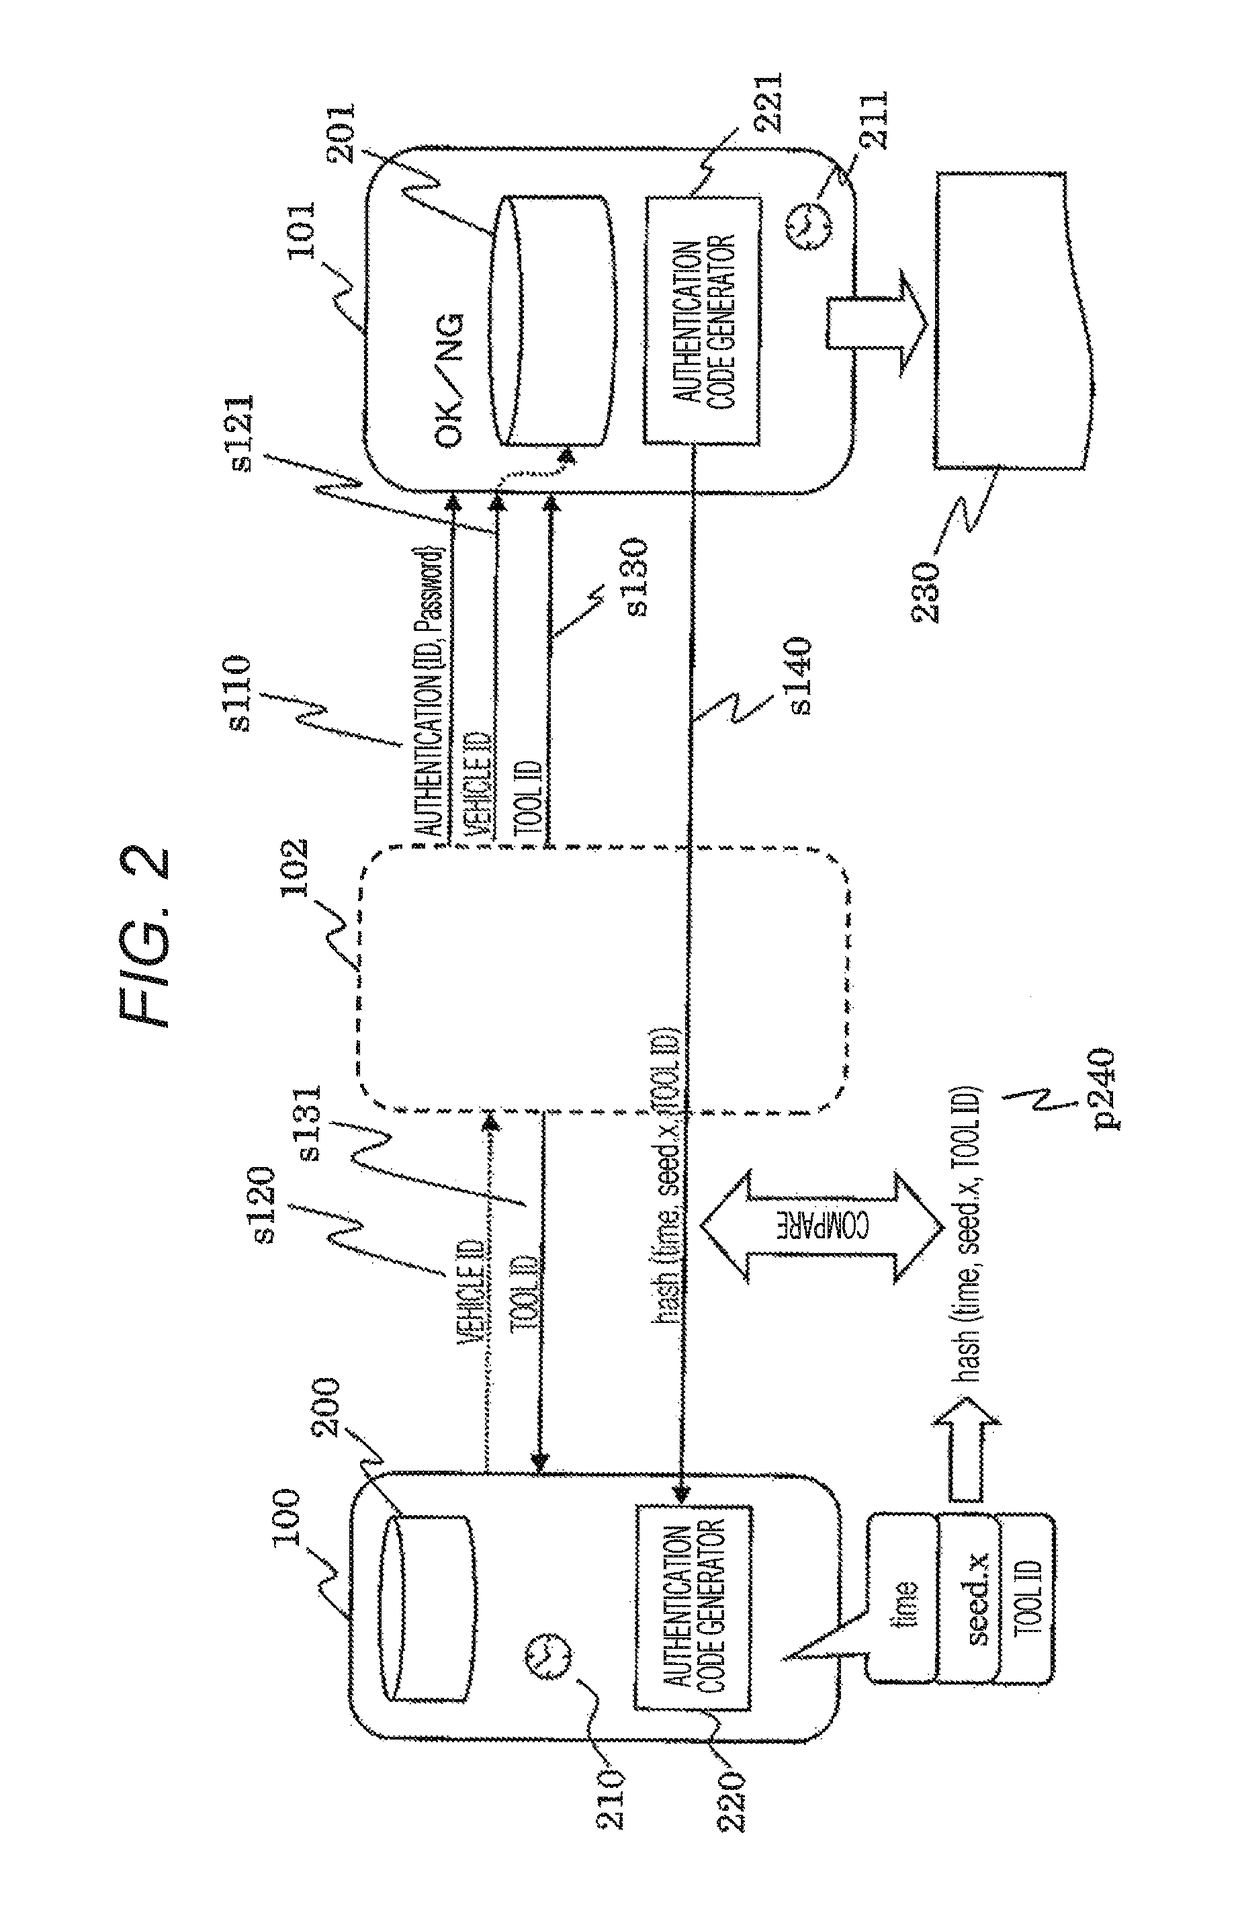 Authentication system and car onboard control device